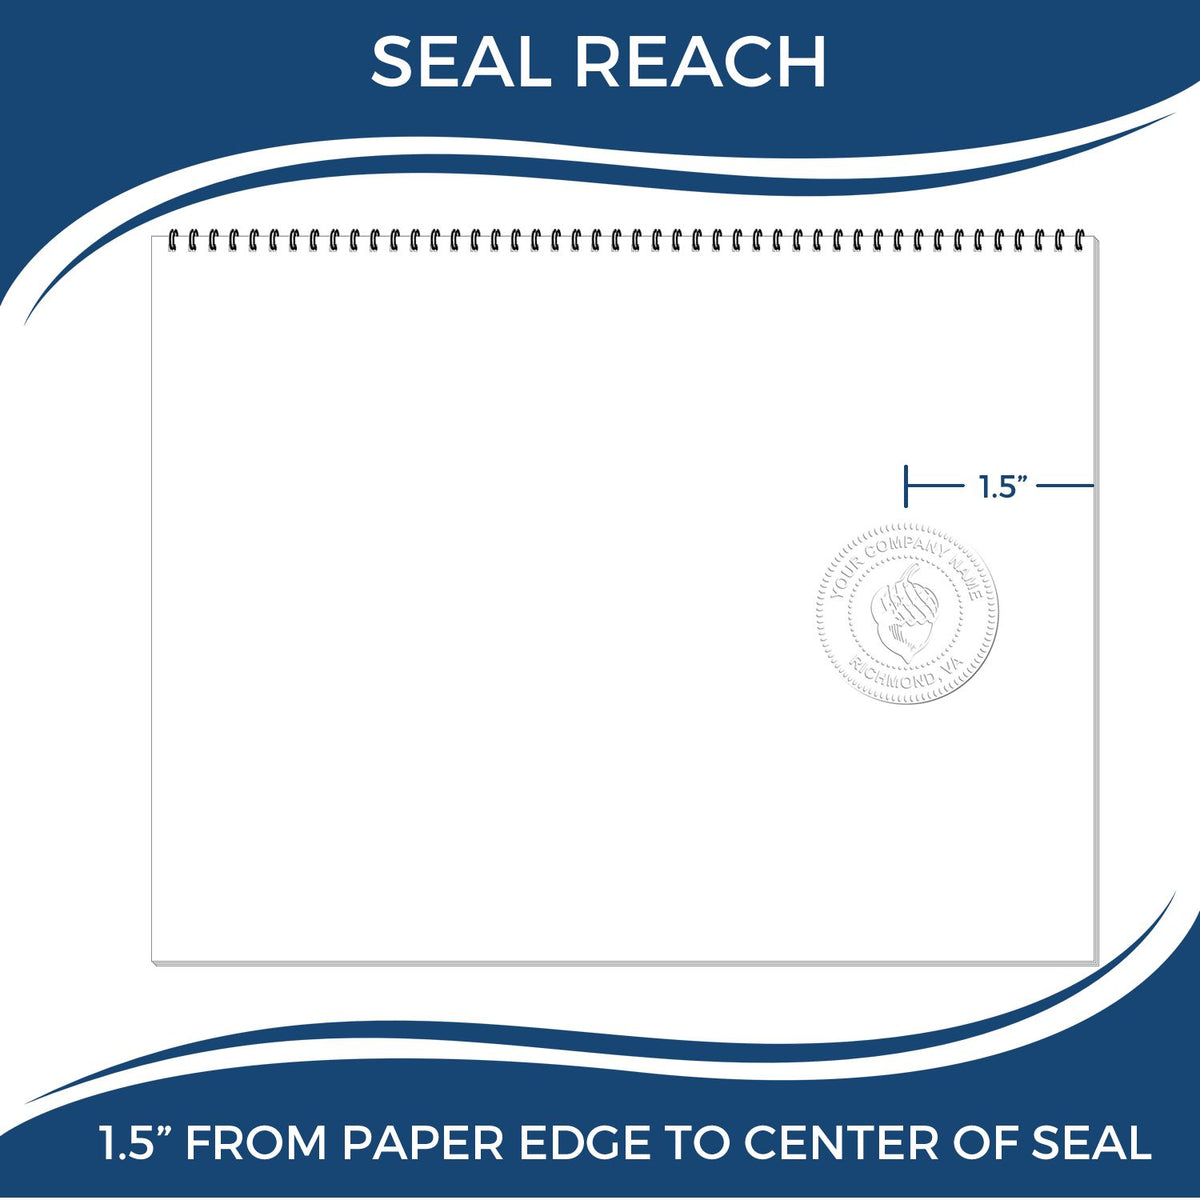 An infographic showing the seal reach which is represented by a ruler and a miniature seal image of the Texas Geologist Desk Seal